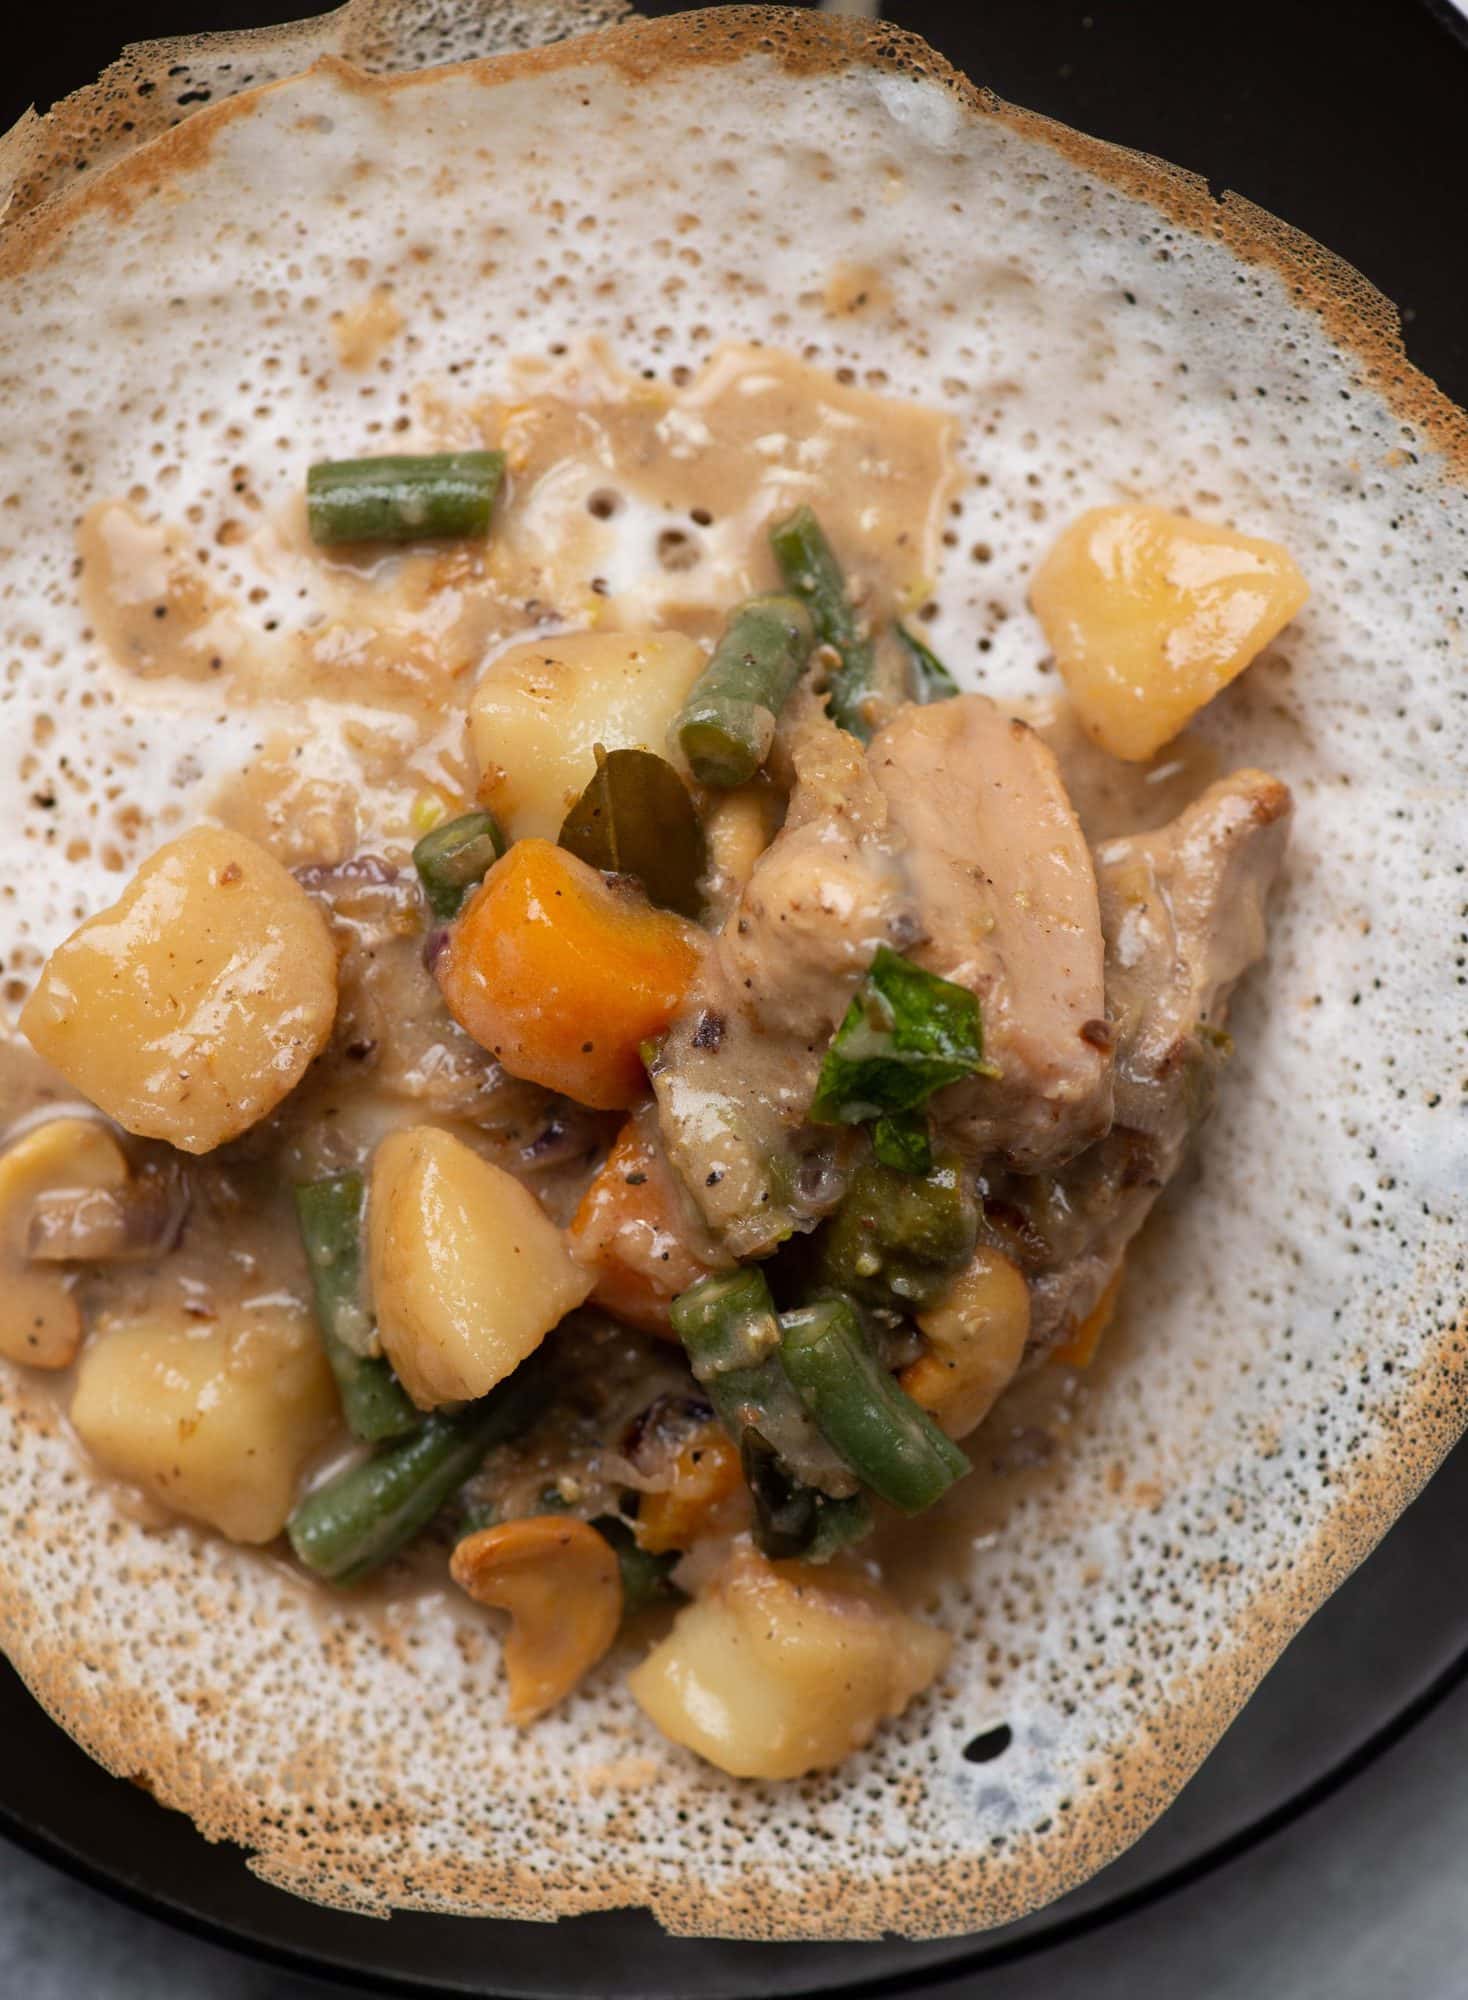 Chicken stew made kerala-style is served on a Appam (a kerala bread made of rice)